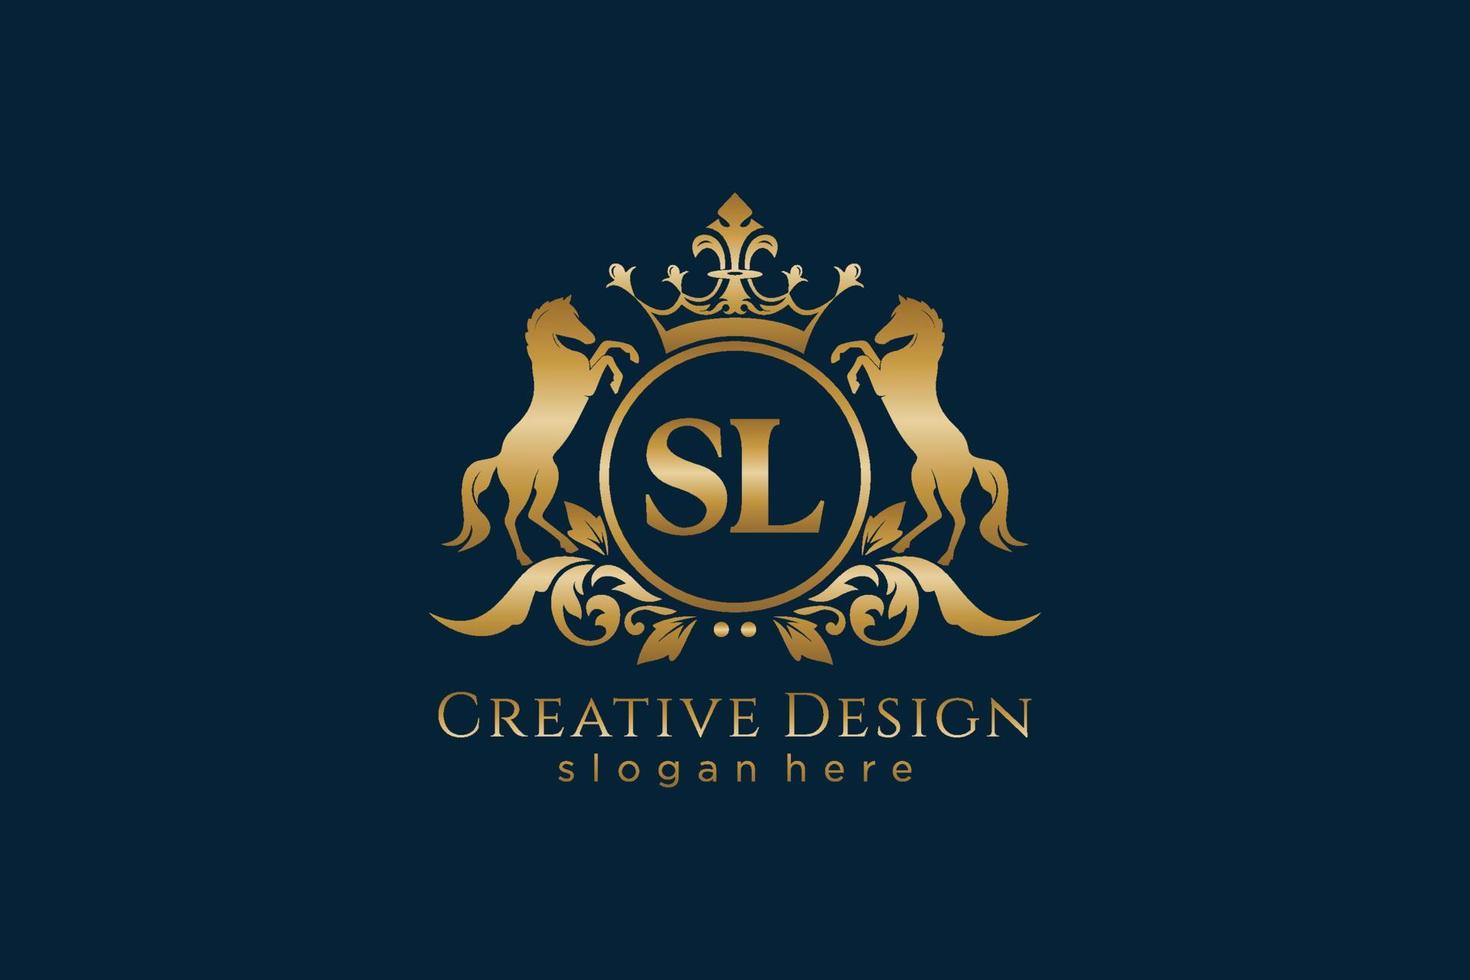 initial SL Retro golden crest with circle and two horses, badge template with scrolls and royal crown - perfect for luxurious branding projects vector